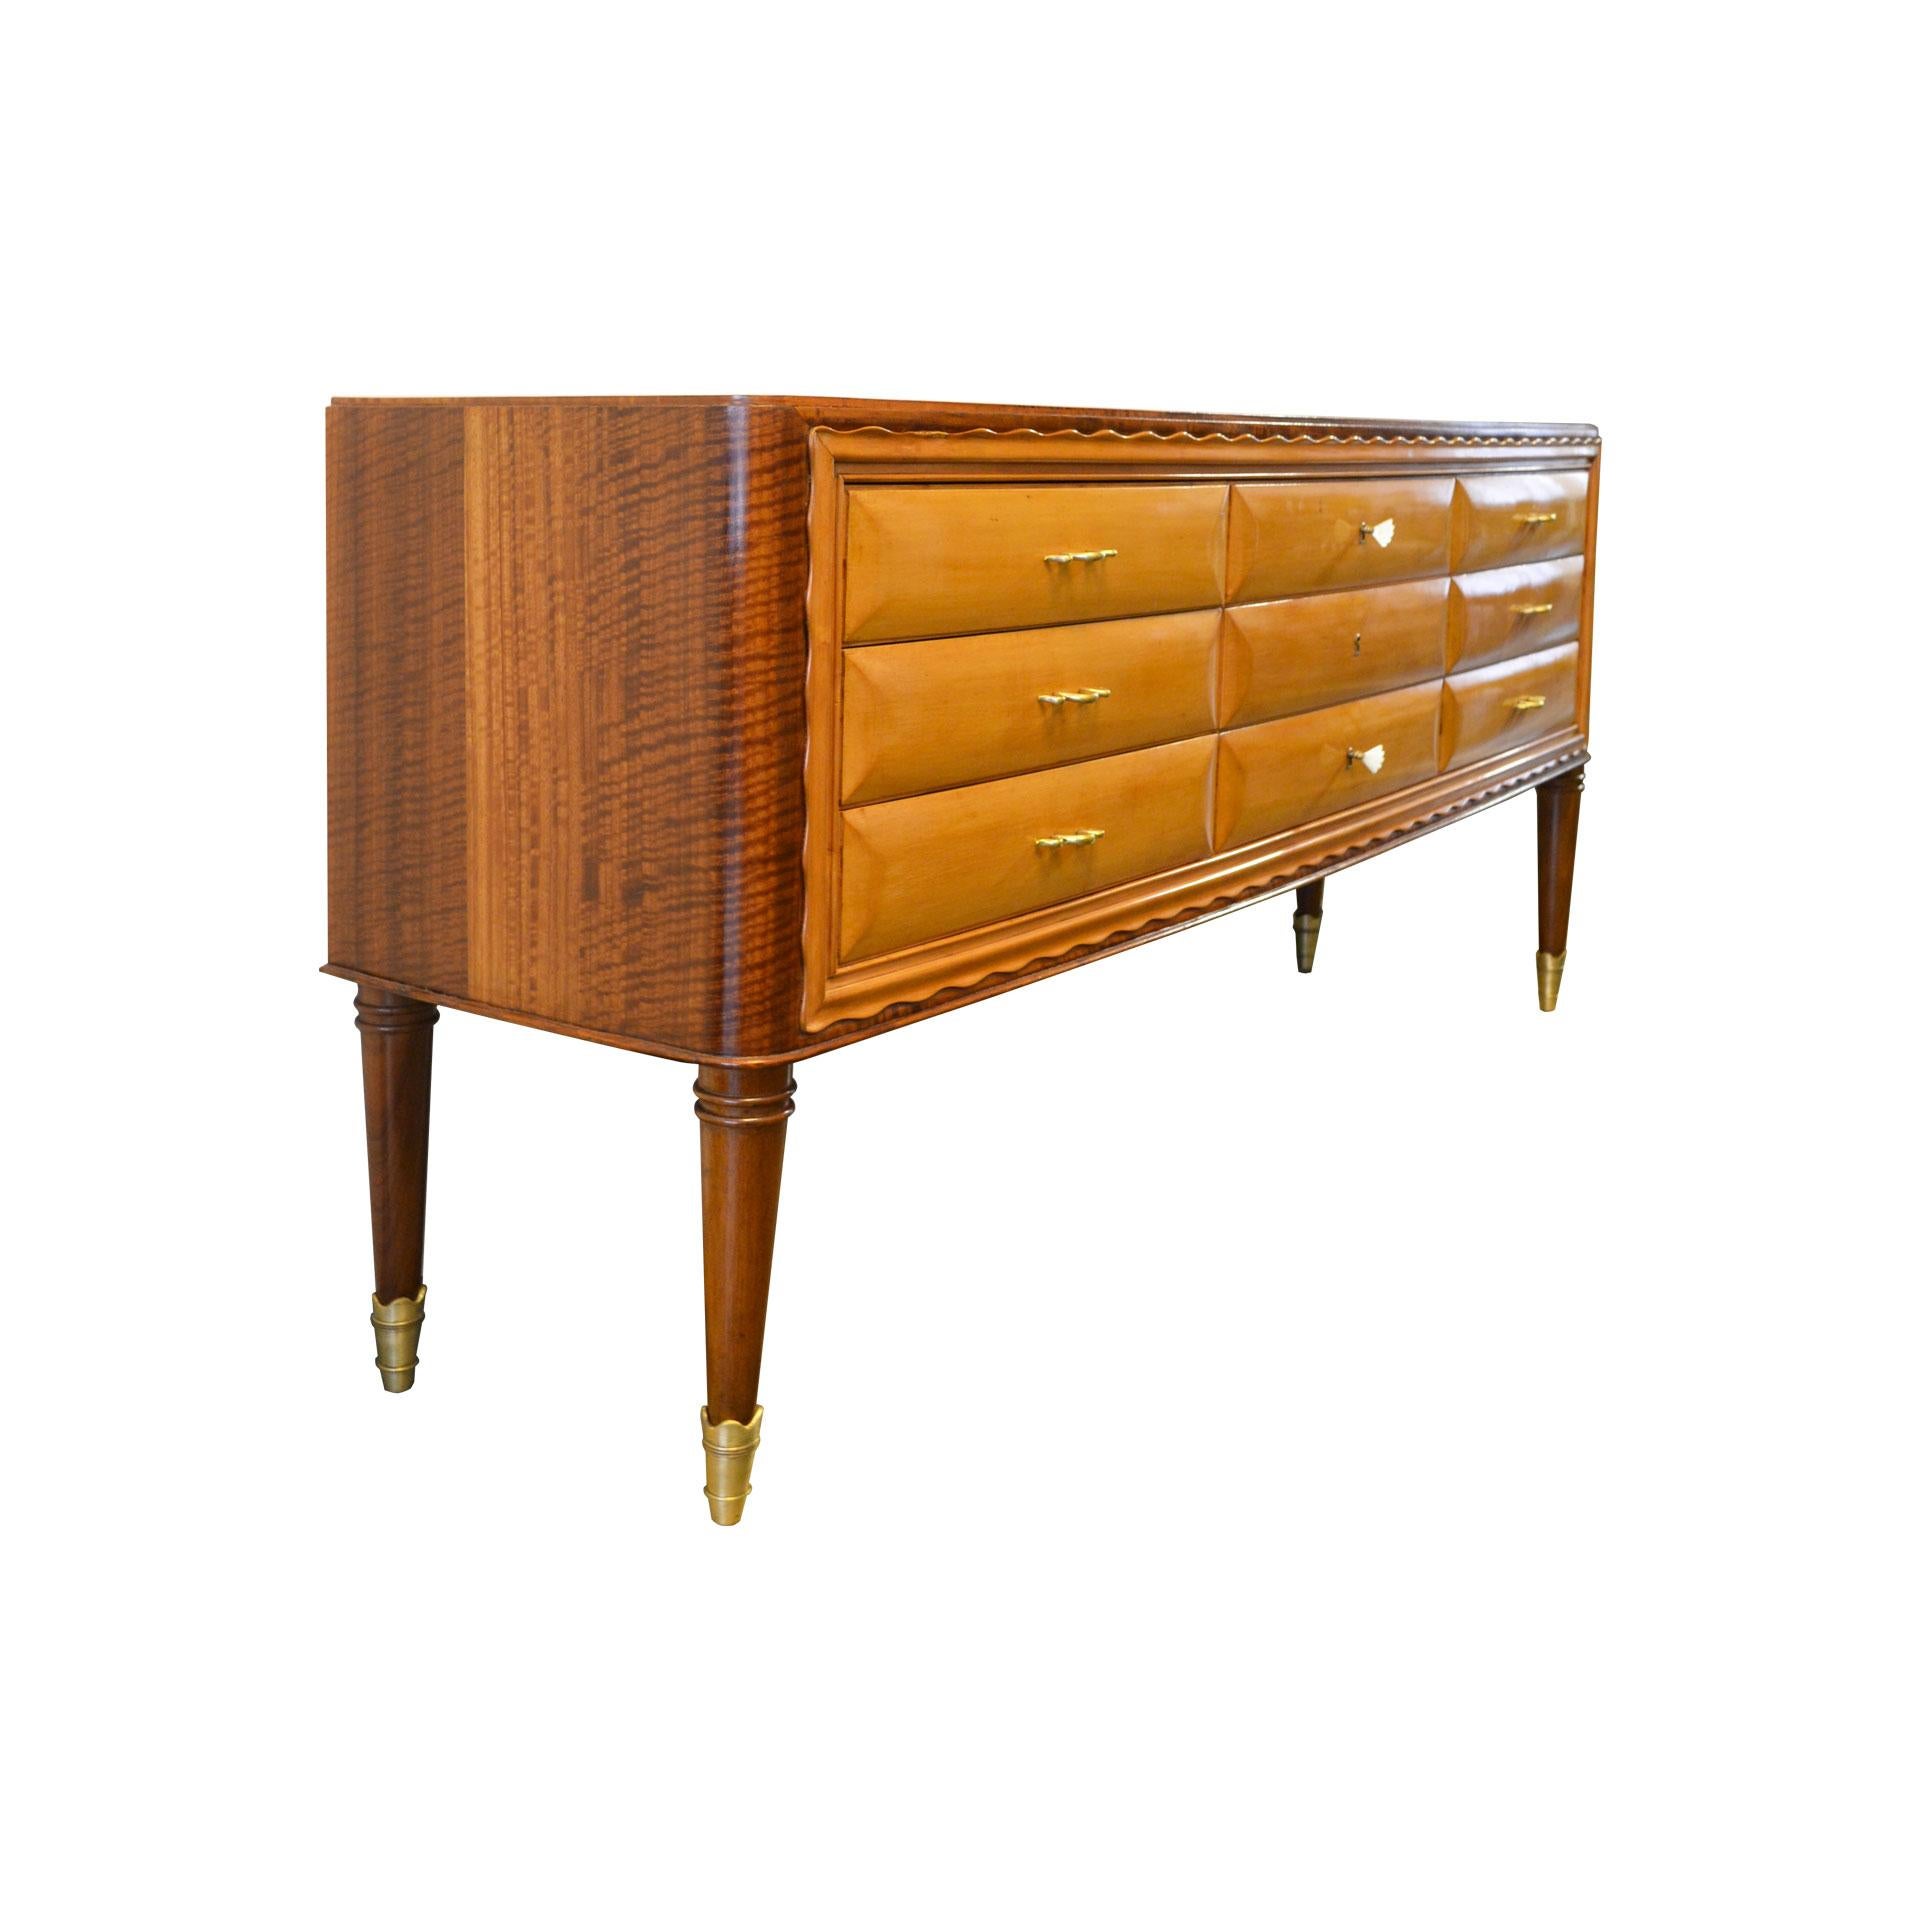 Sideboard with drawers in the style of Paolo Buffa designed in 1950s with structure in wood and very particular handles in brass. Very good condition. Original in all its parts.